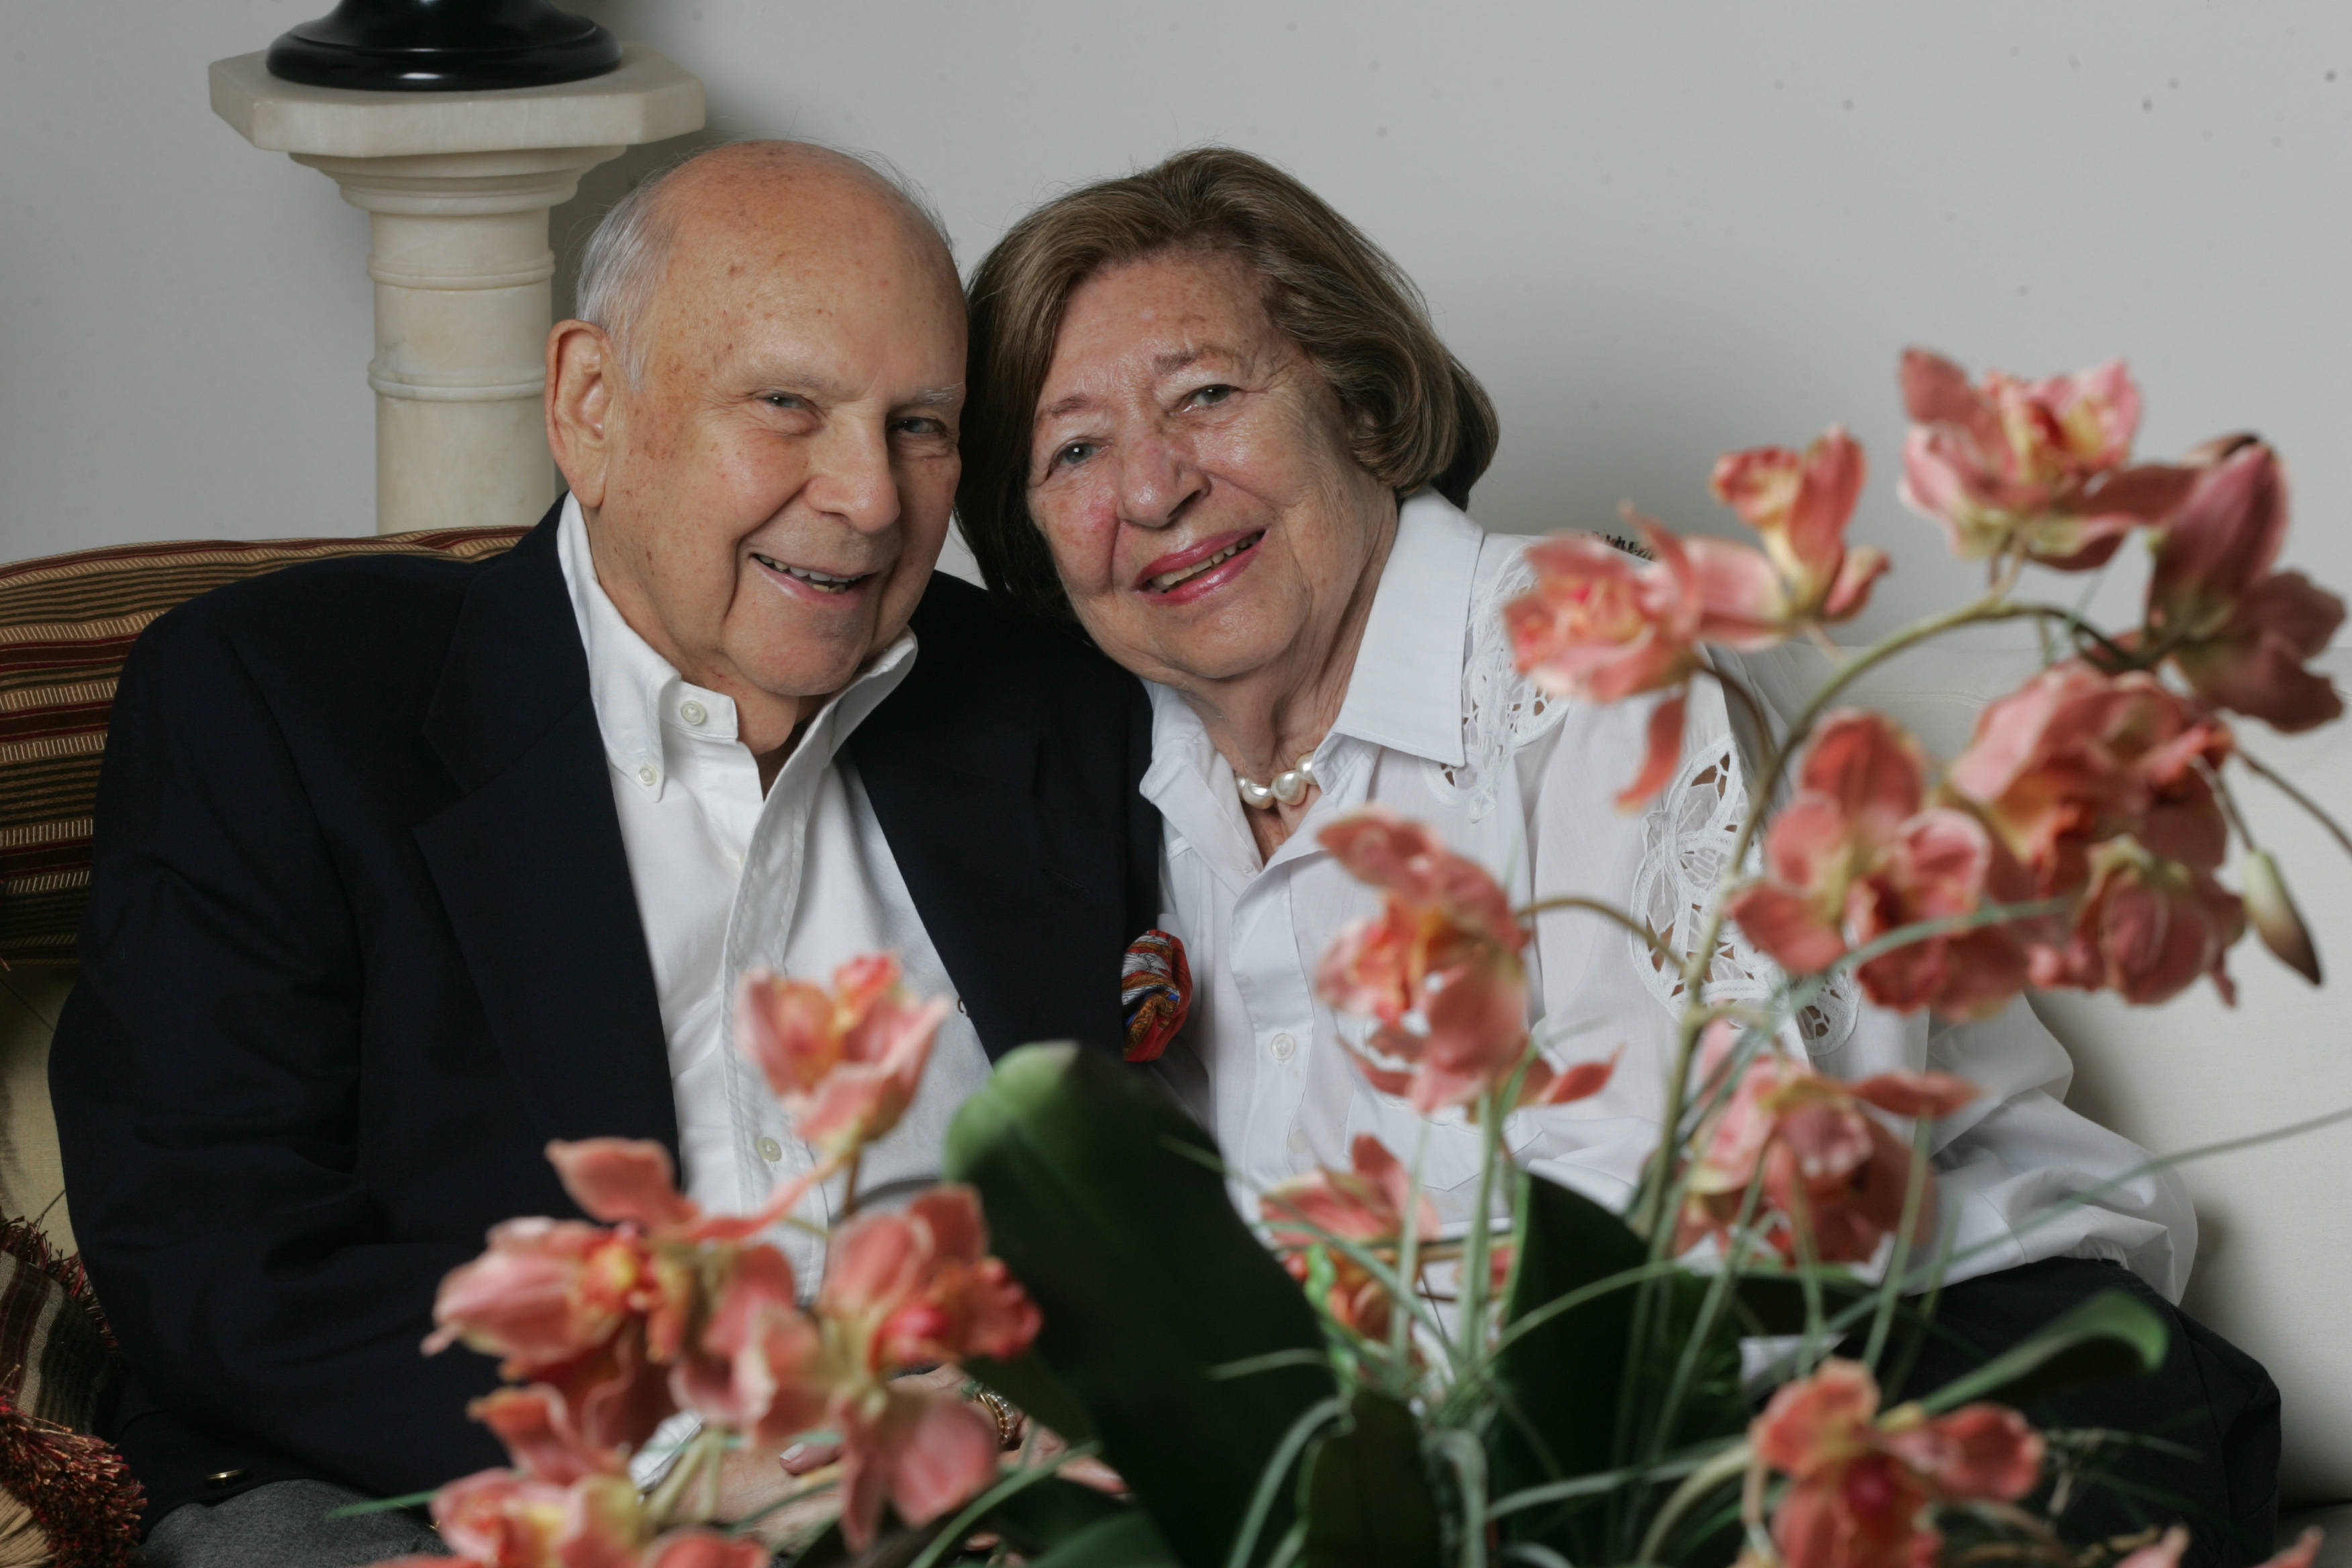 Portrait of Marvin and Sybil Weiner sitting together, the photo is framed by flowers